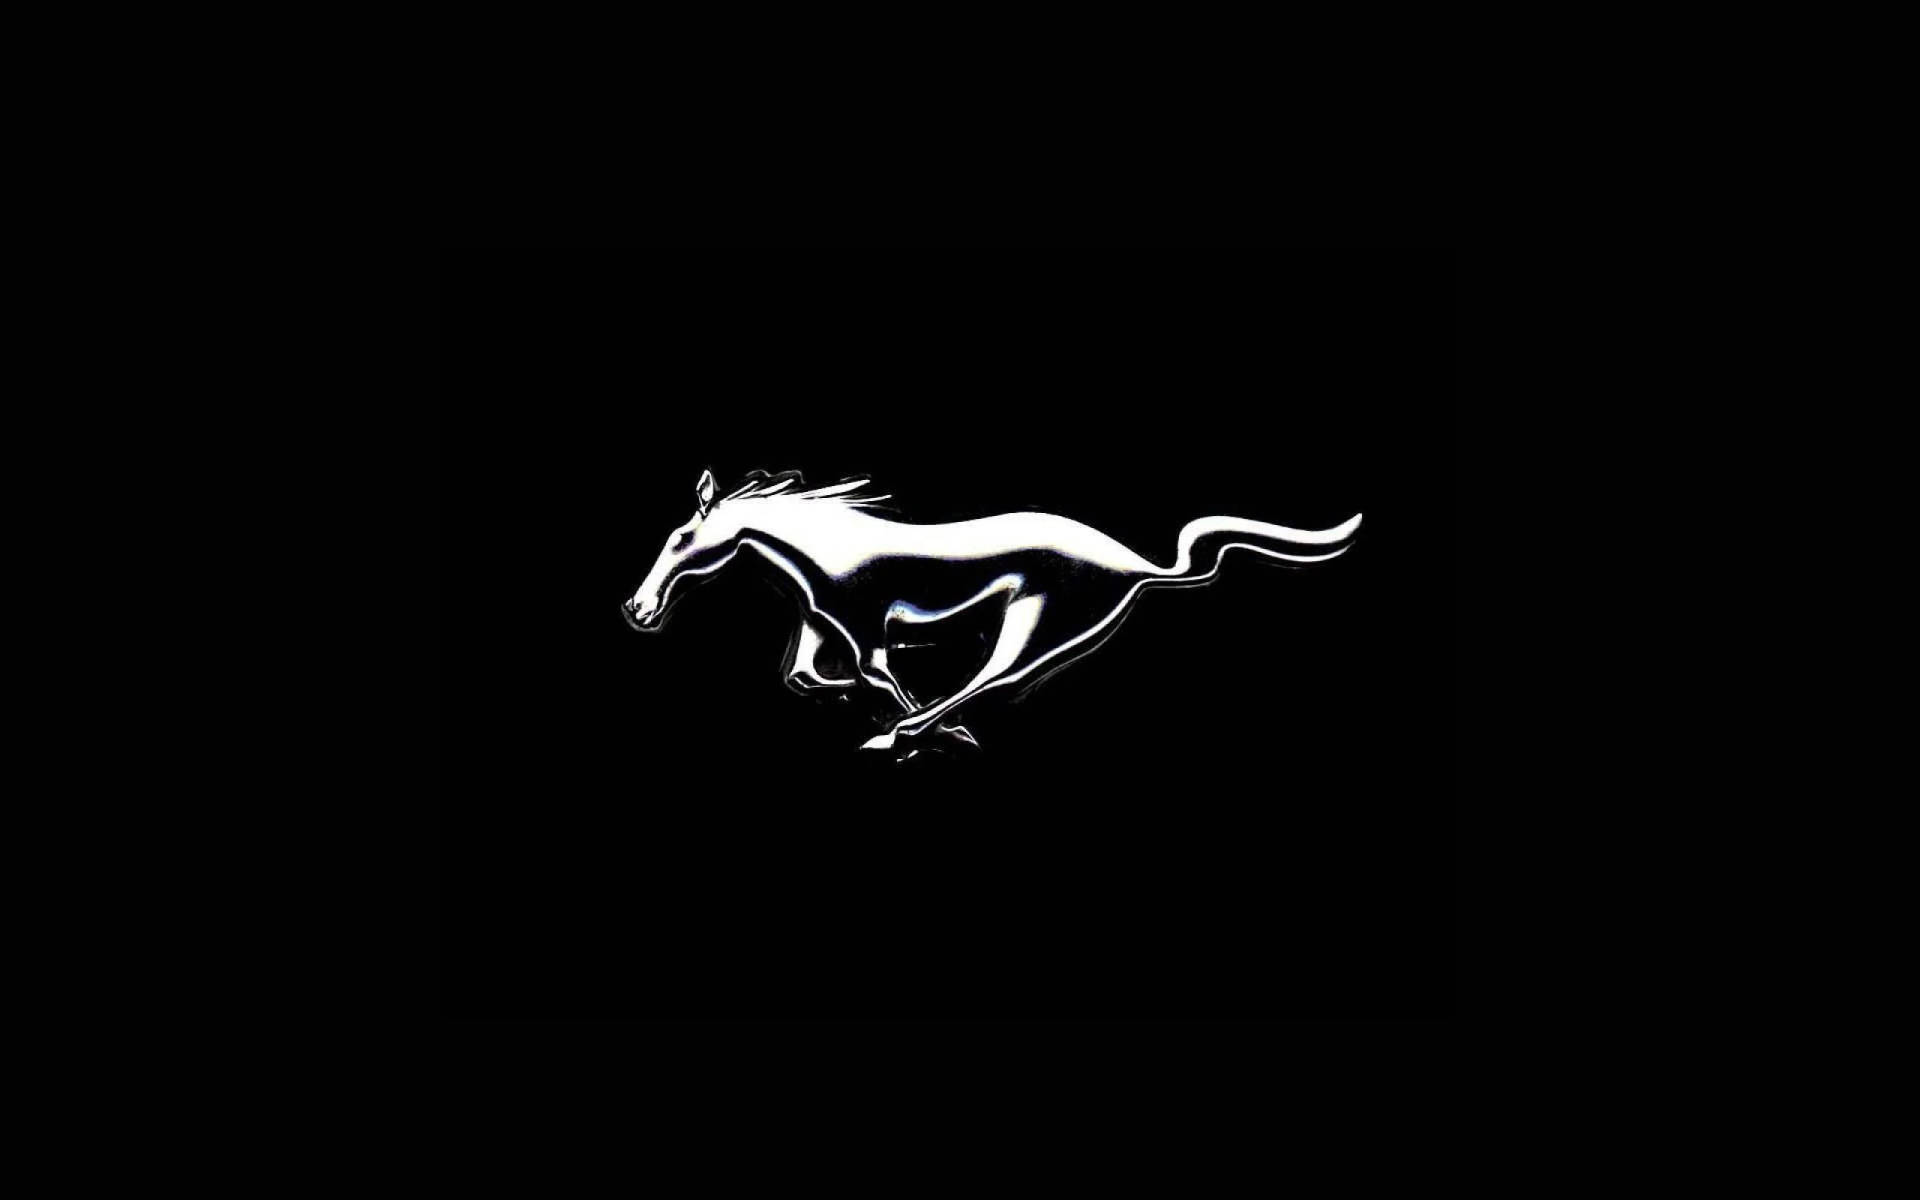 Silver Mustang Emblem In Solid Black